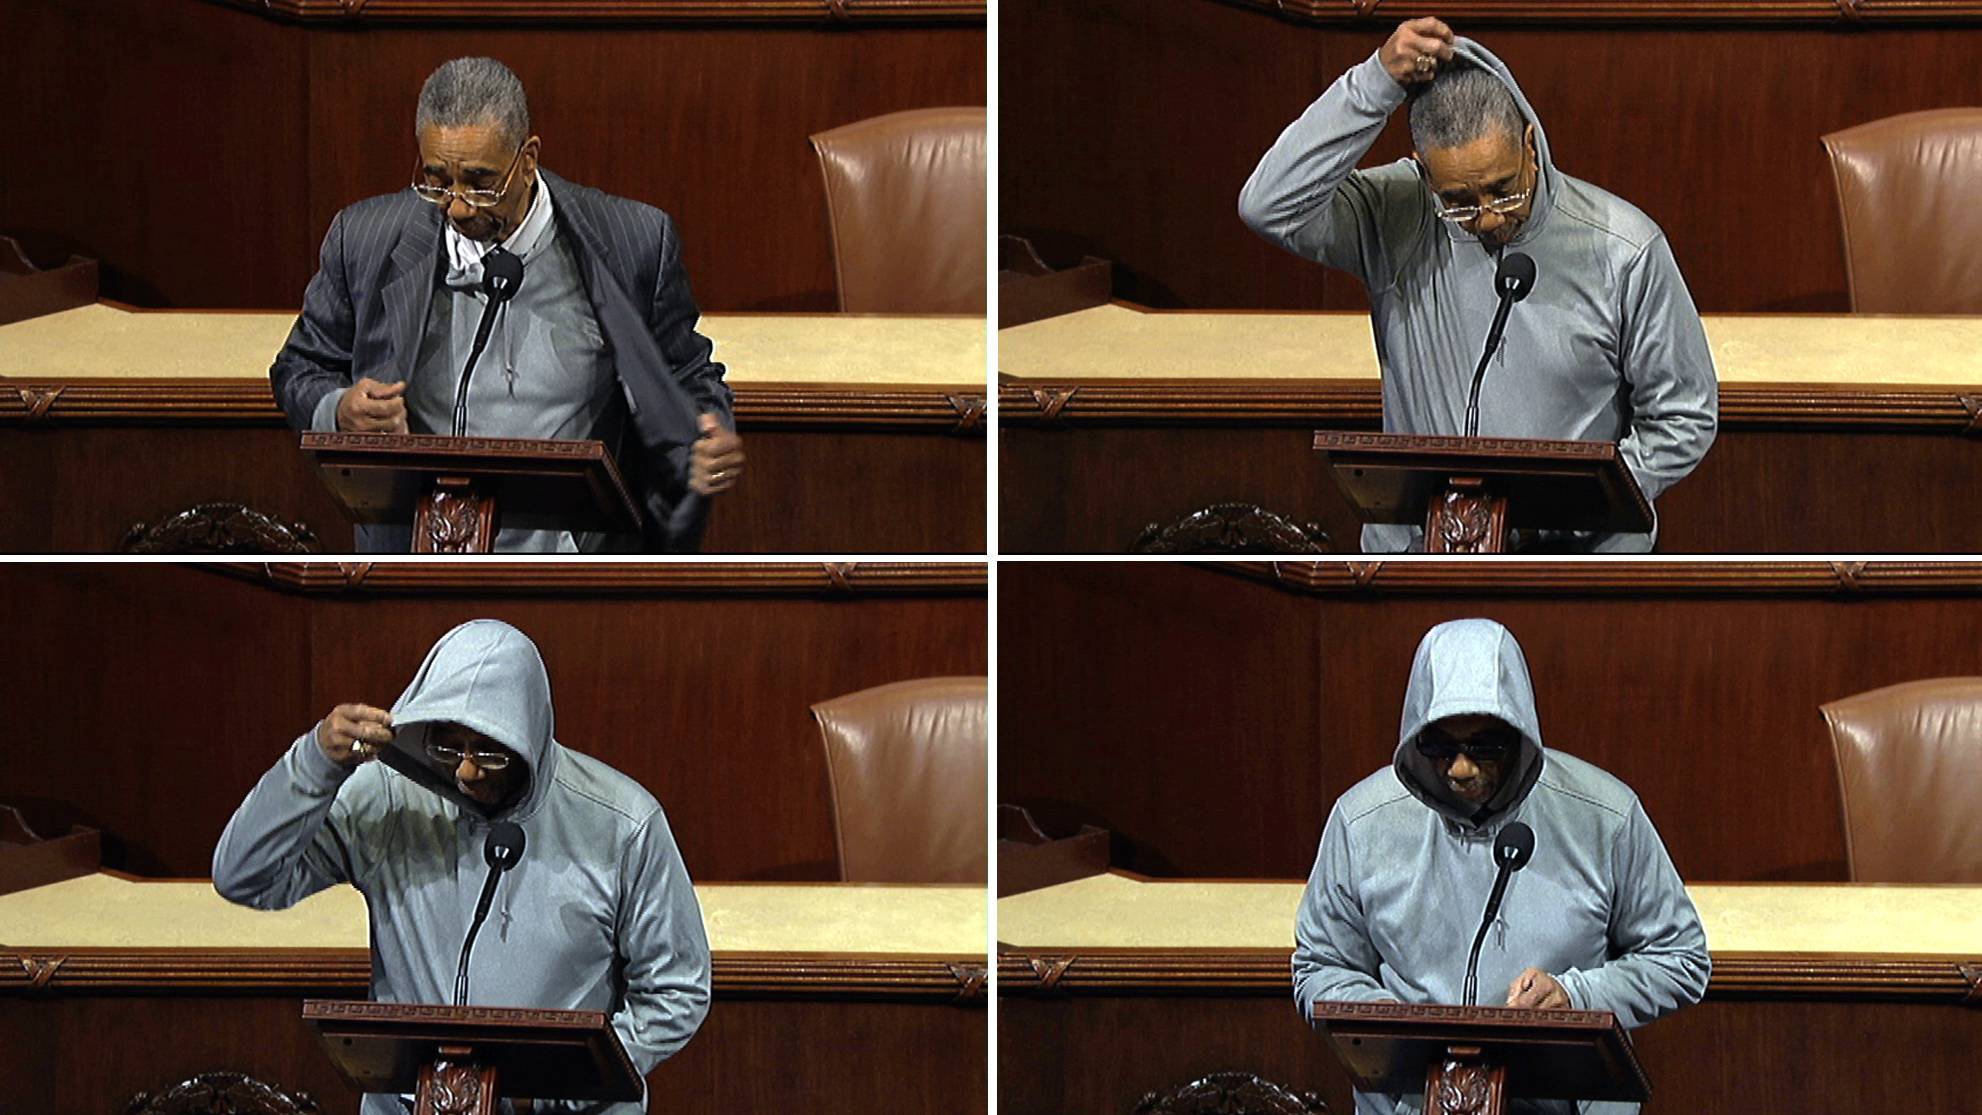 Bobby Rush - “I applaud the young people all across the land who are making a statement about hoodies, about the real hoodlums in this nation, particularly those who wear official clothes,” Rep. Bobby Rush said on the House floor in comments protesting the death of Trayvon Martin. “Racial profiling has to stop. Just because someone wears a hoodie does not make them a hoodlum.”&nbsp;(Photo: AP Photo)